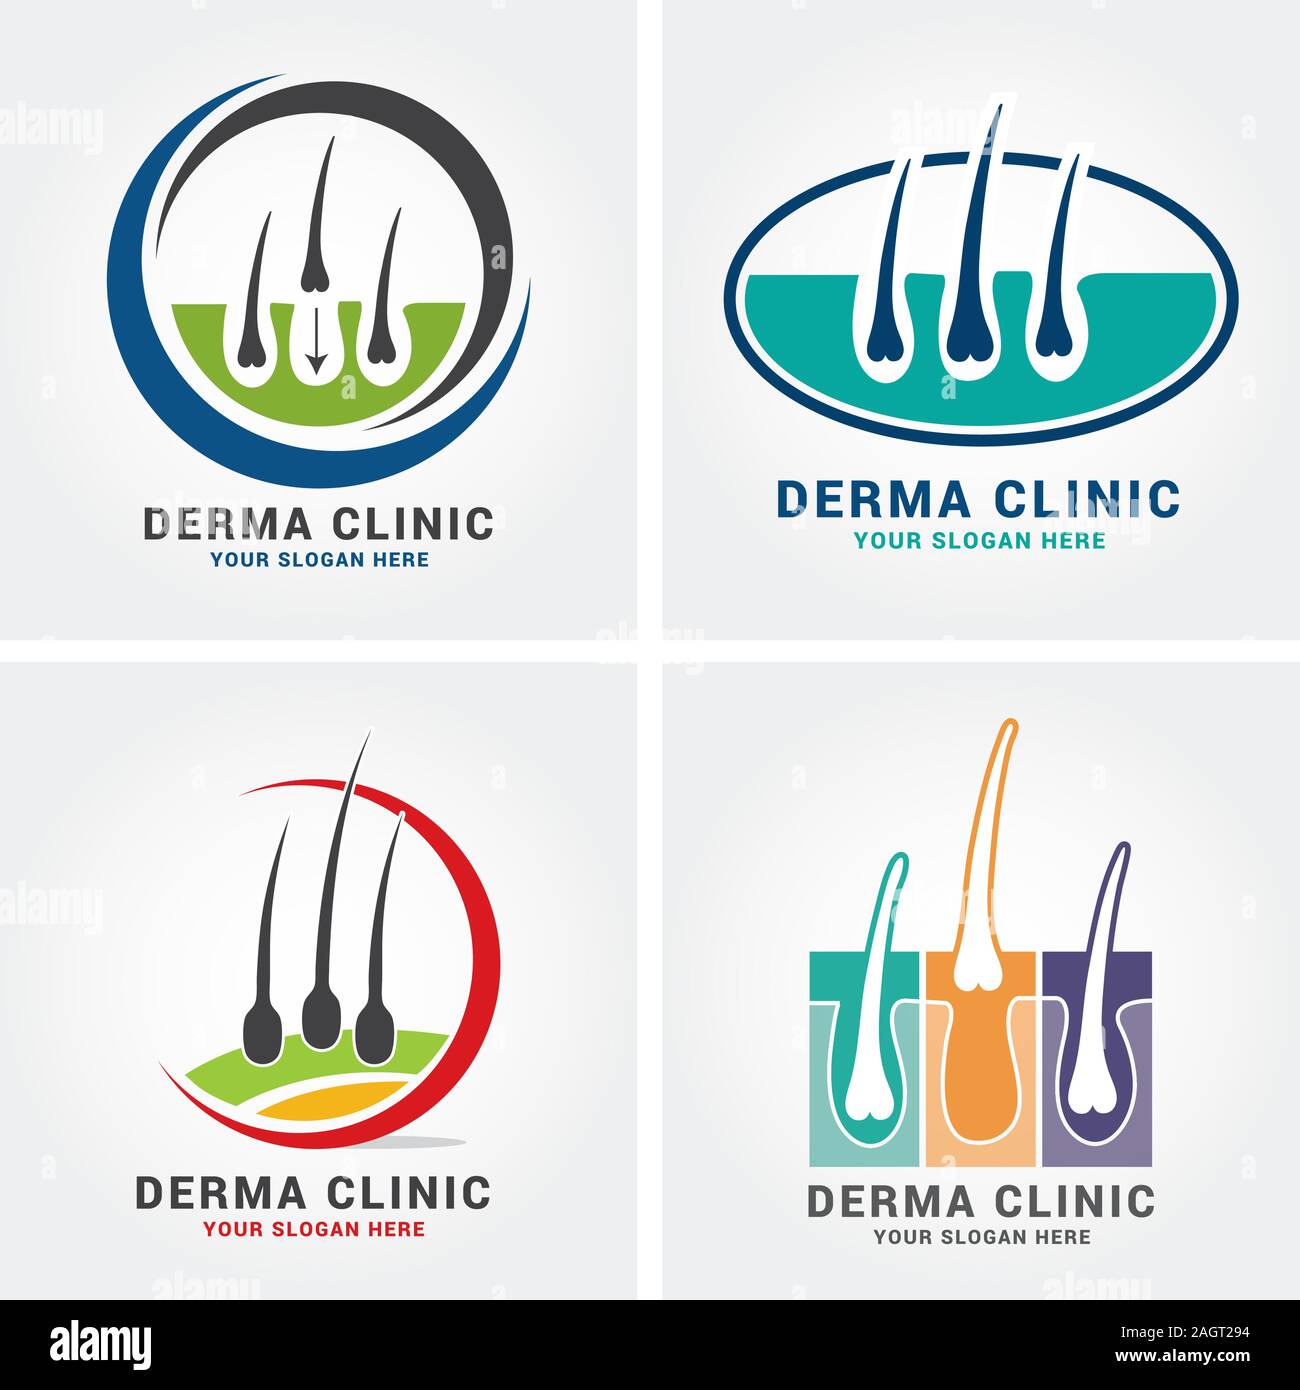 Skin and hair care logo vector free download